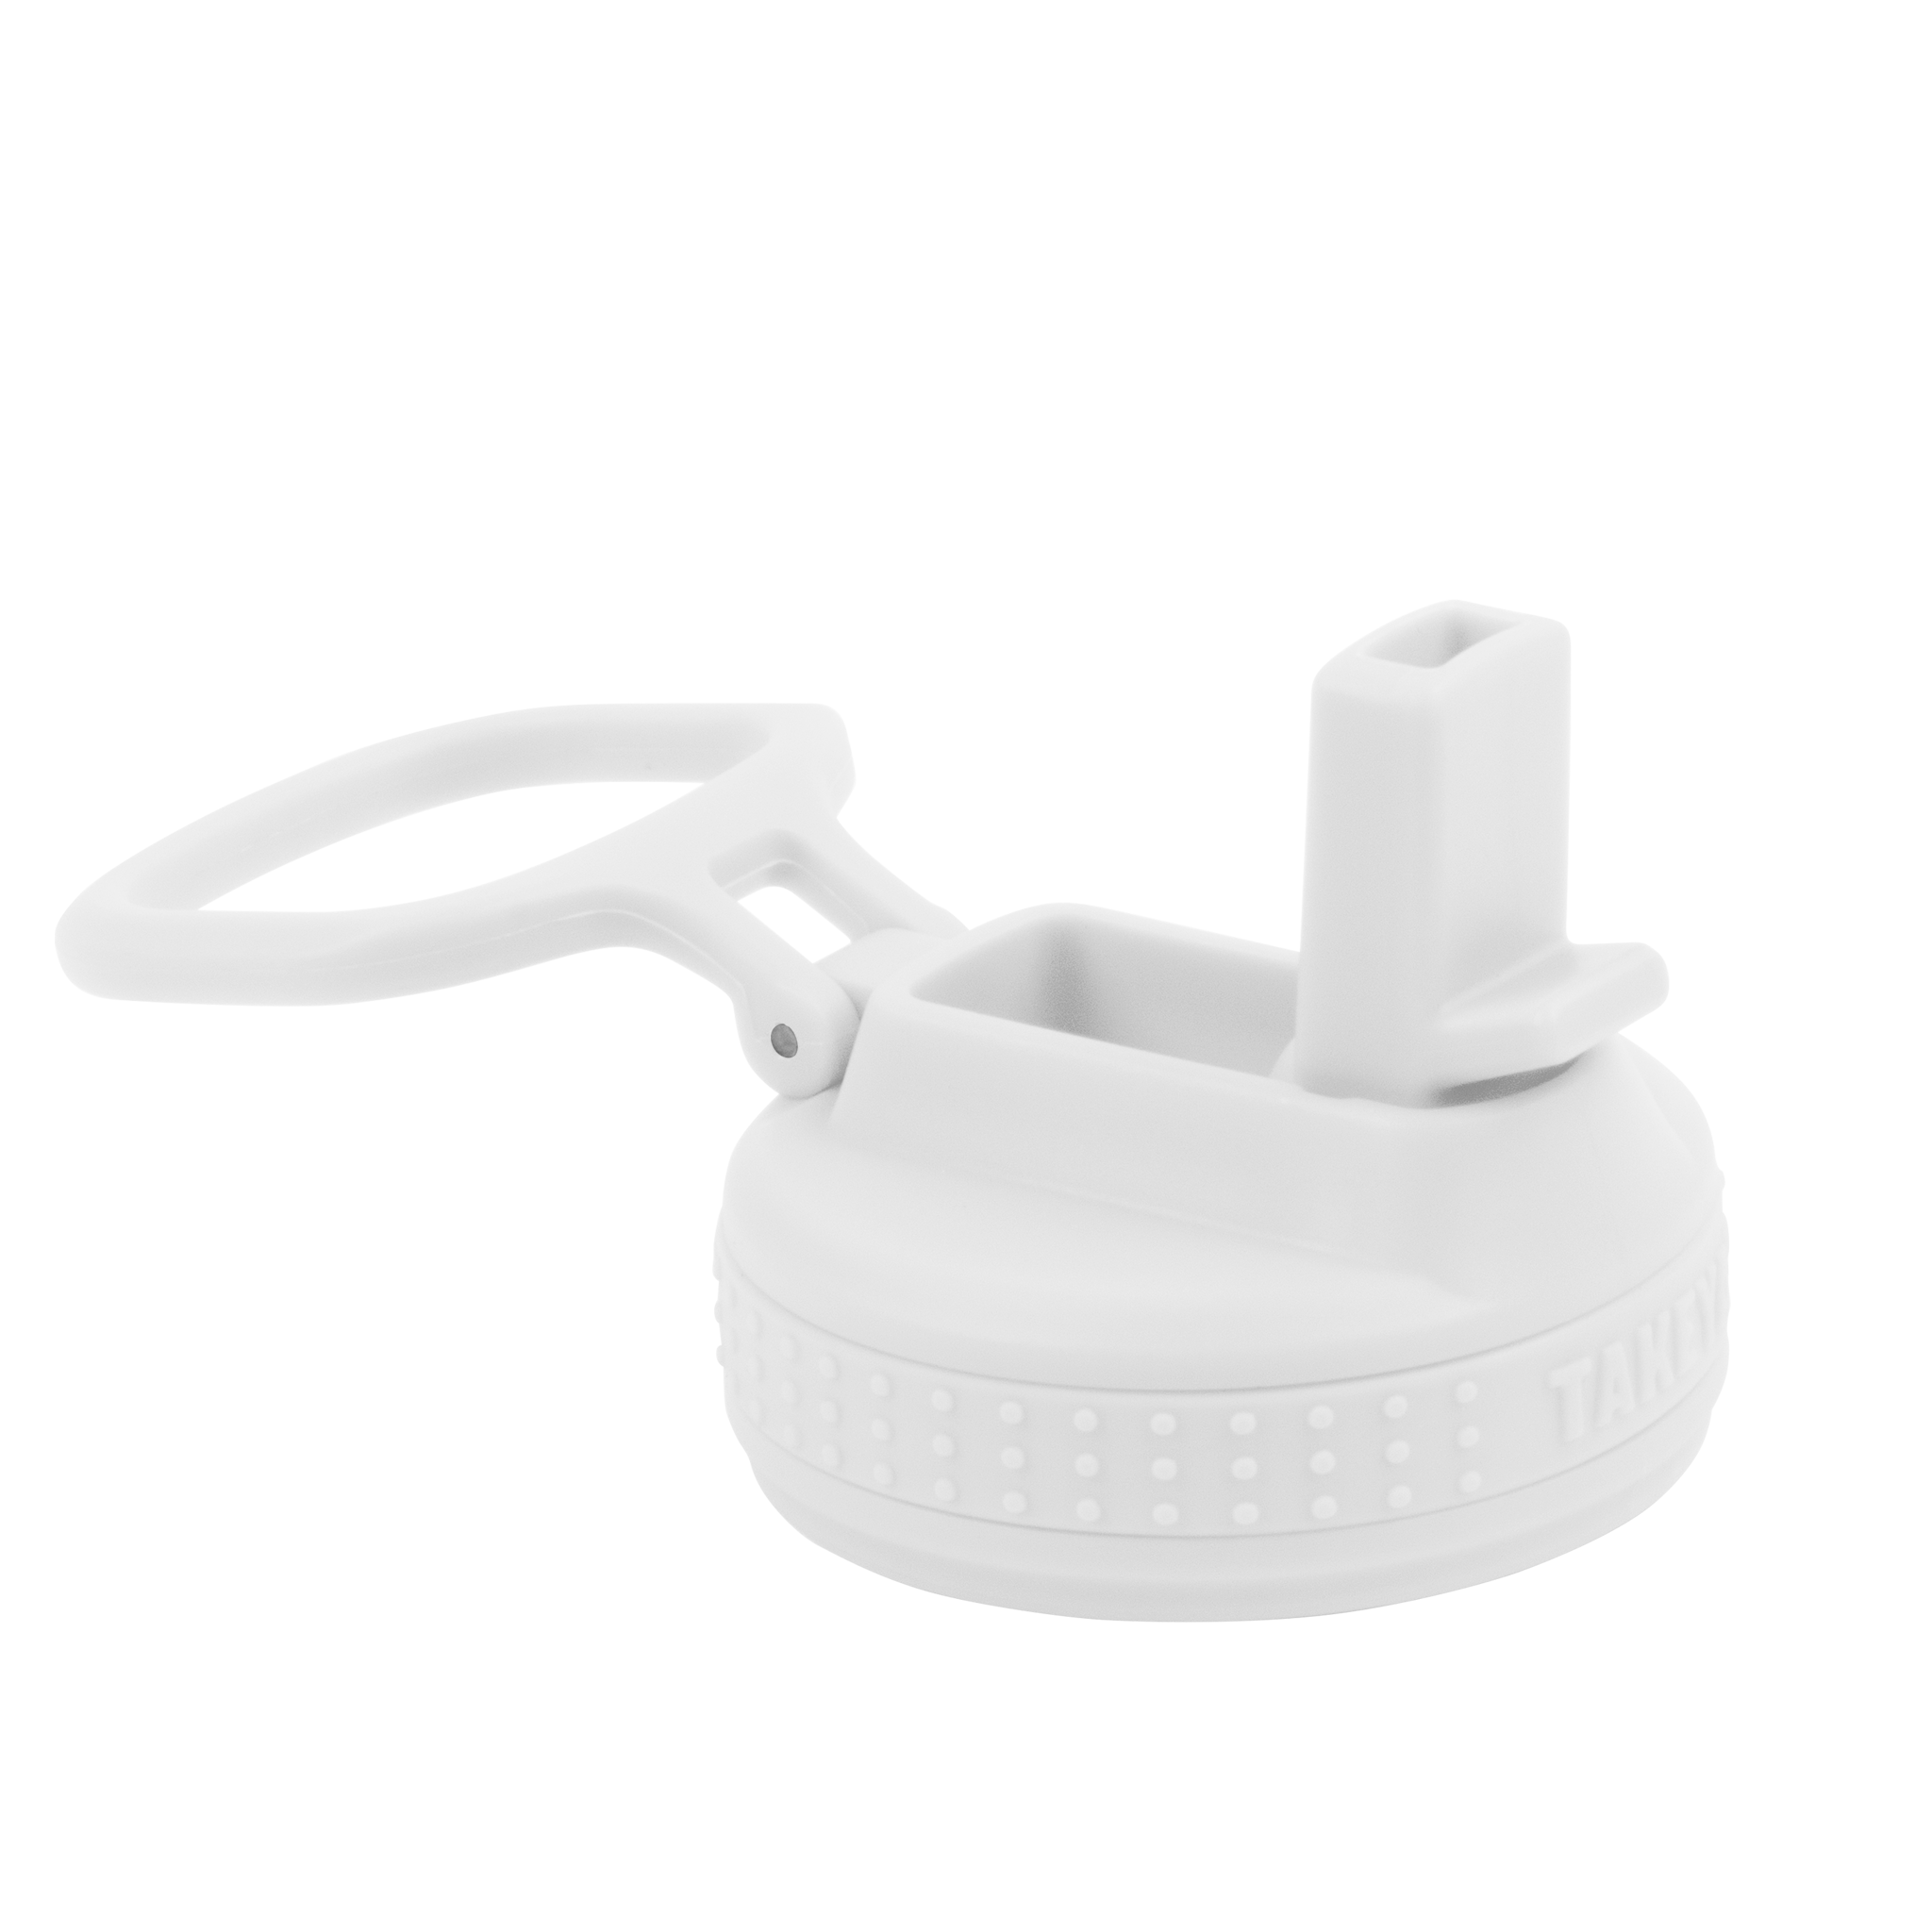 Takeya Actives Insulated Straw Lid - White